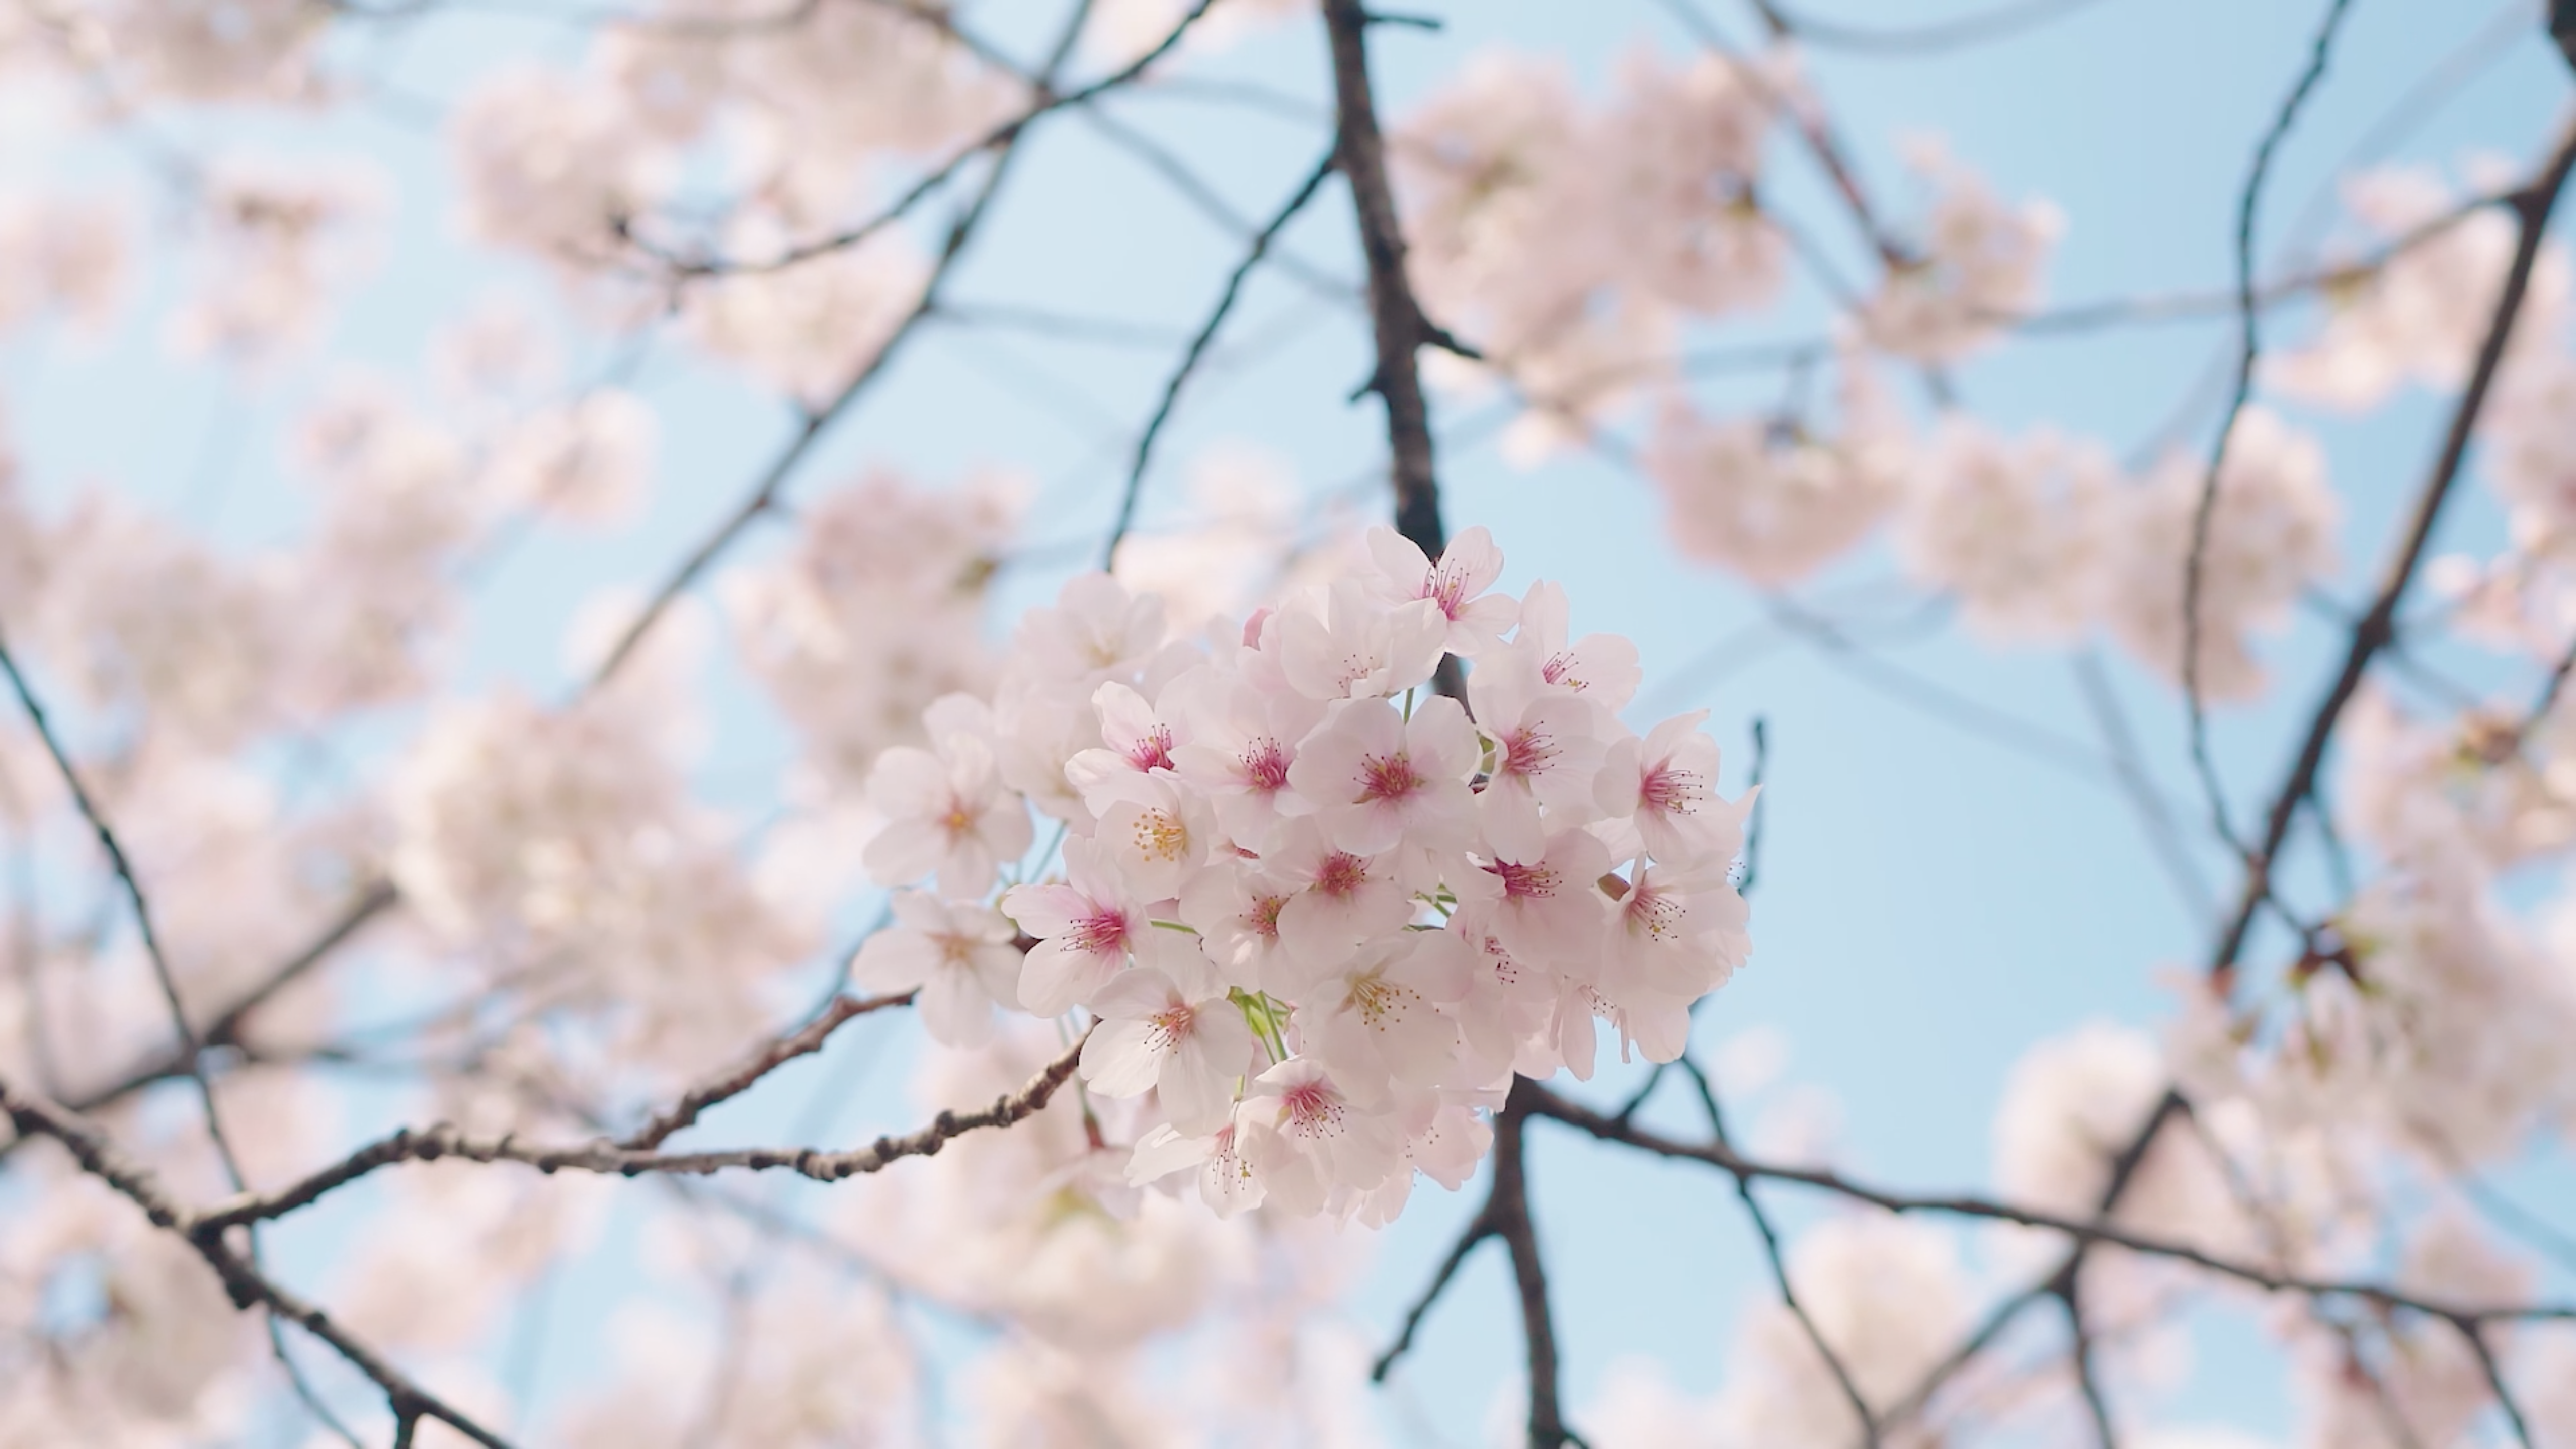 Cherry blossom in detailed view